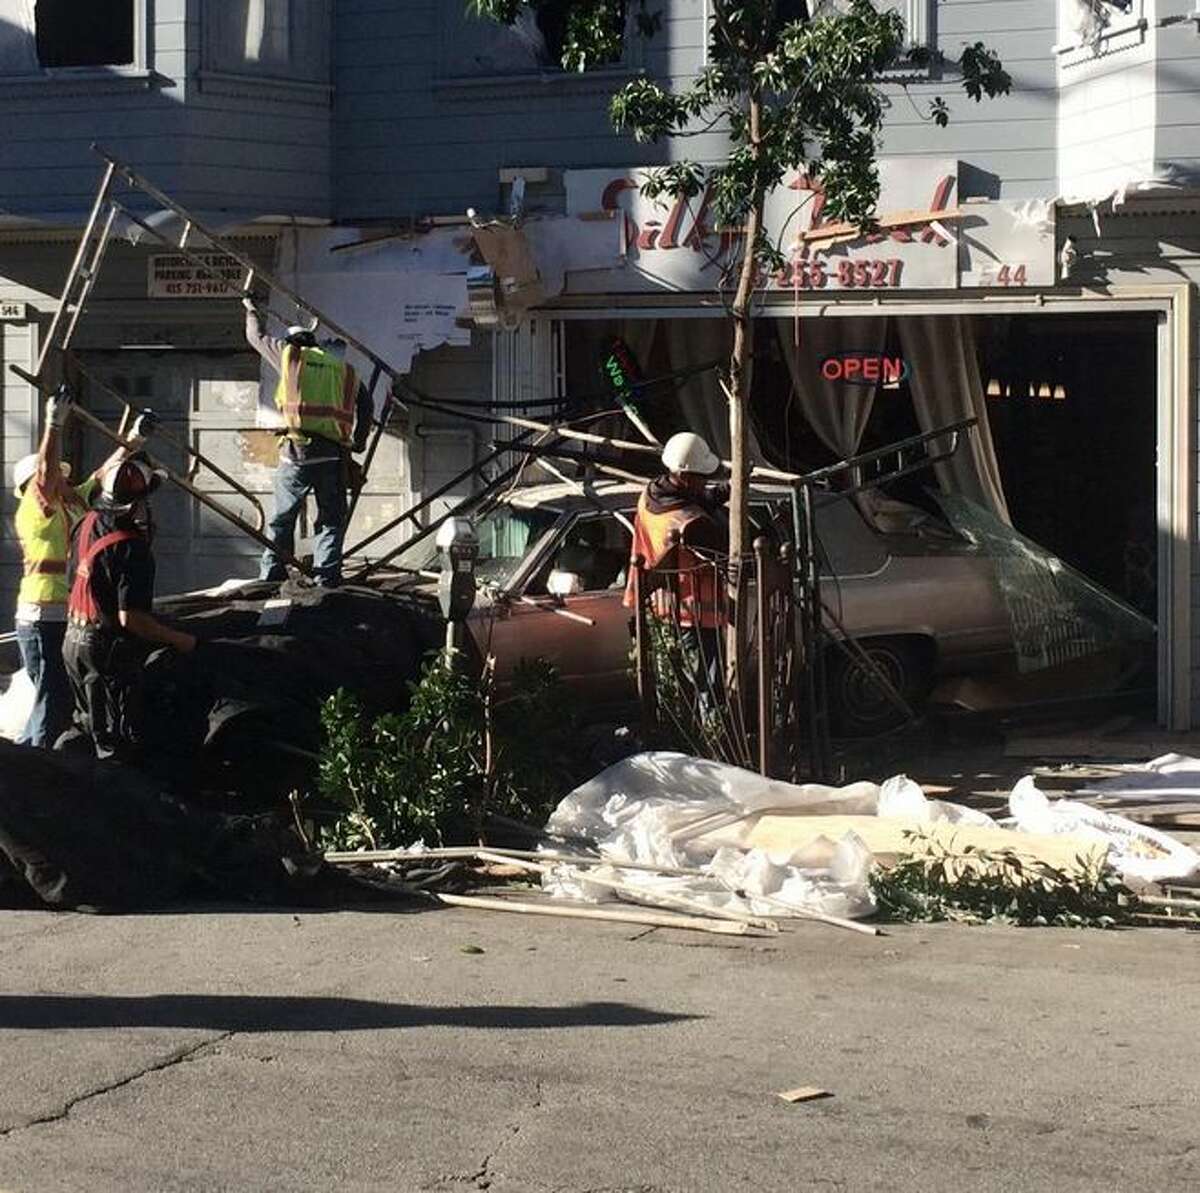 A car crashed through the front of a nail salon in the Lower Haight neighborhood of San Francisco the afternoon of March 6, 2015.